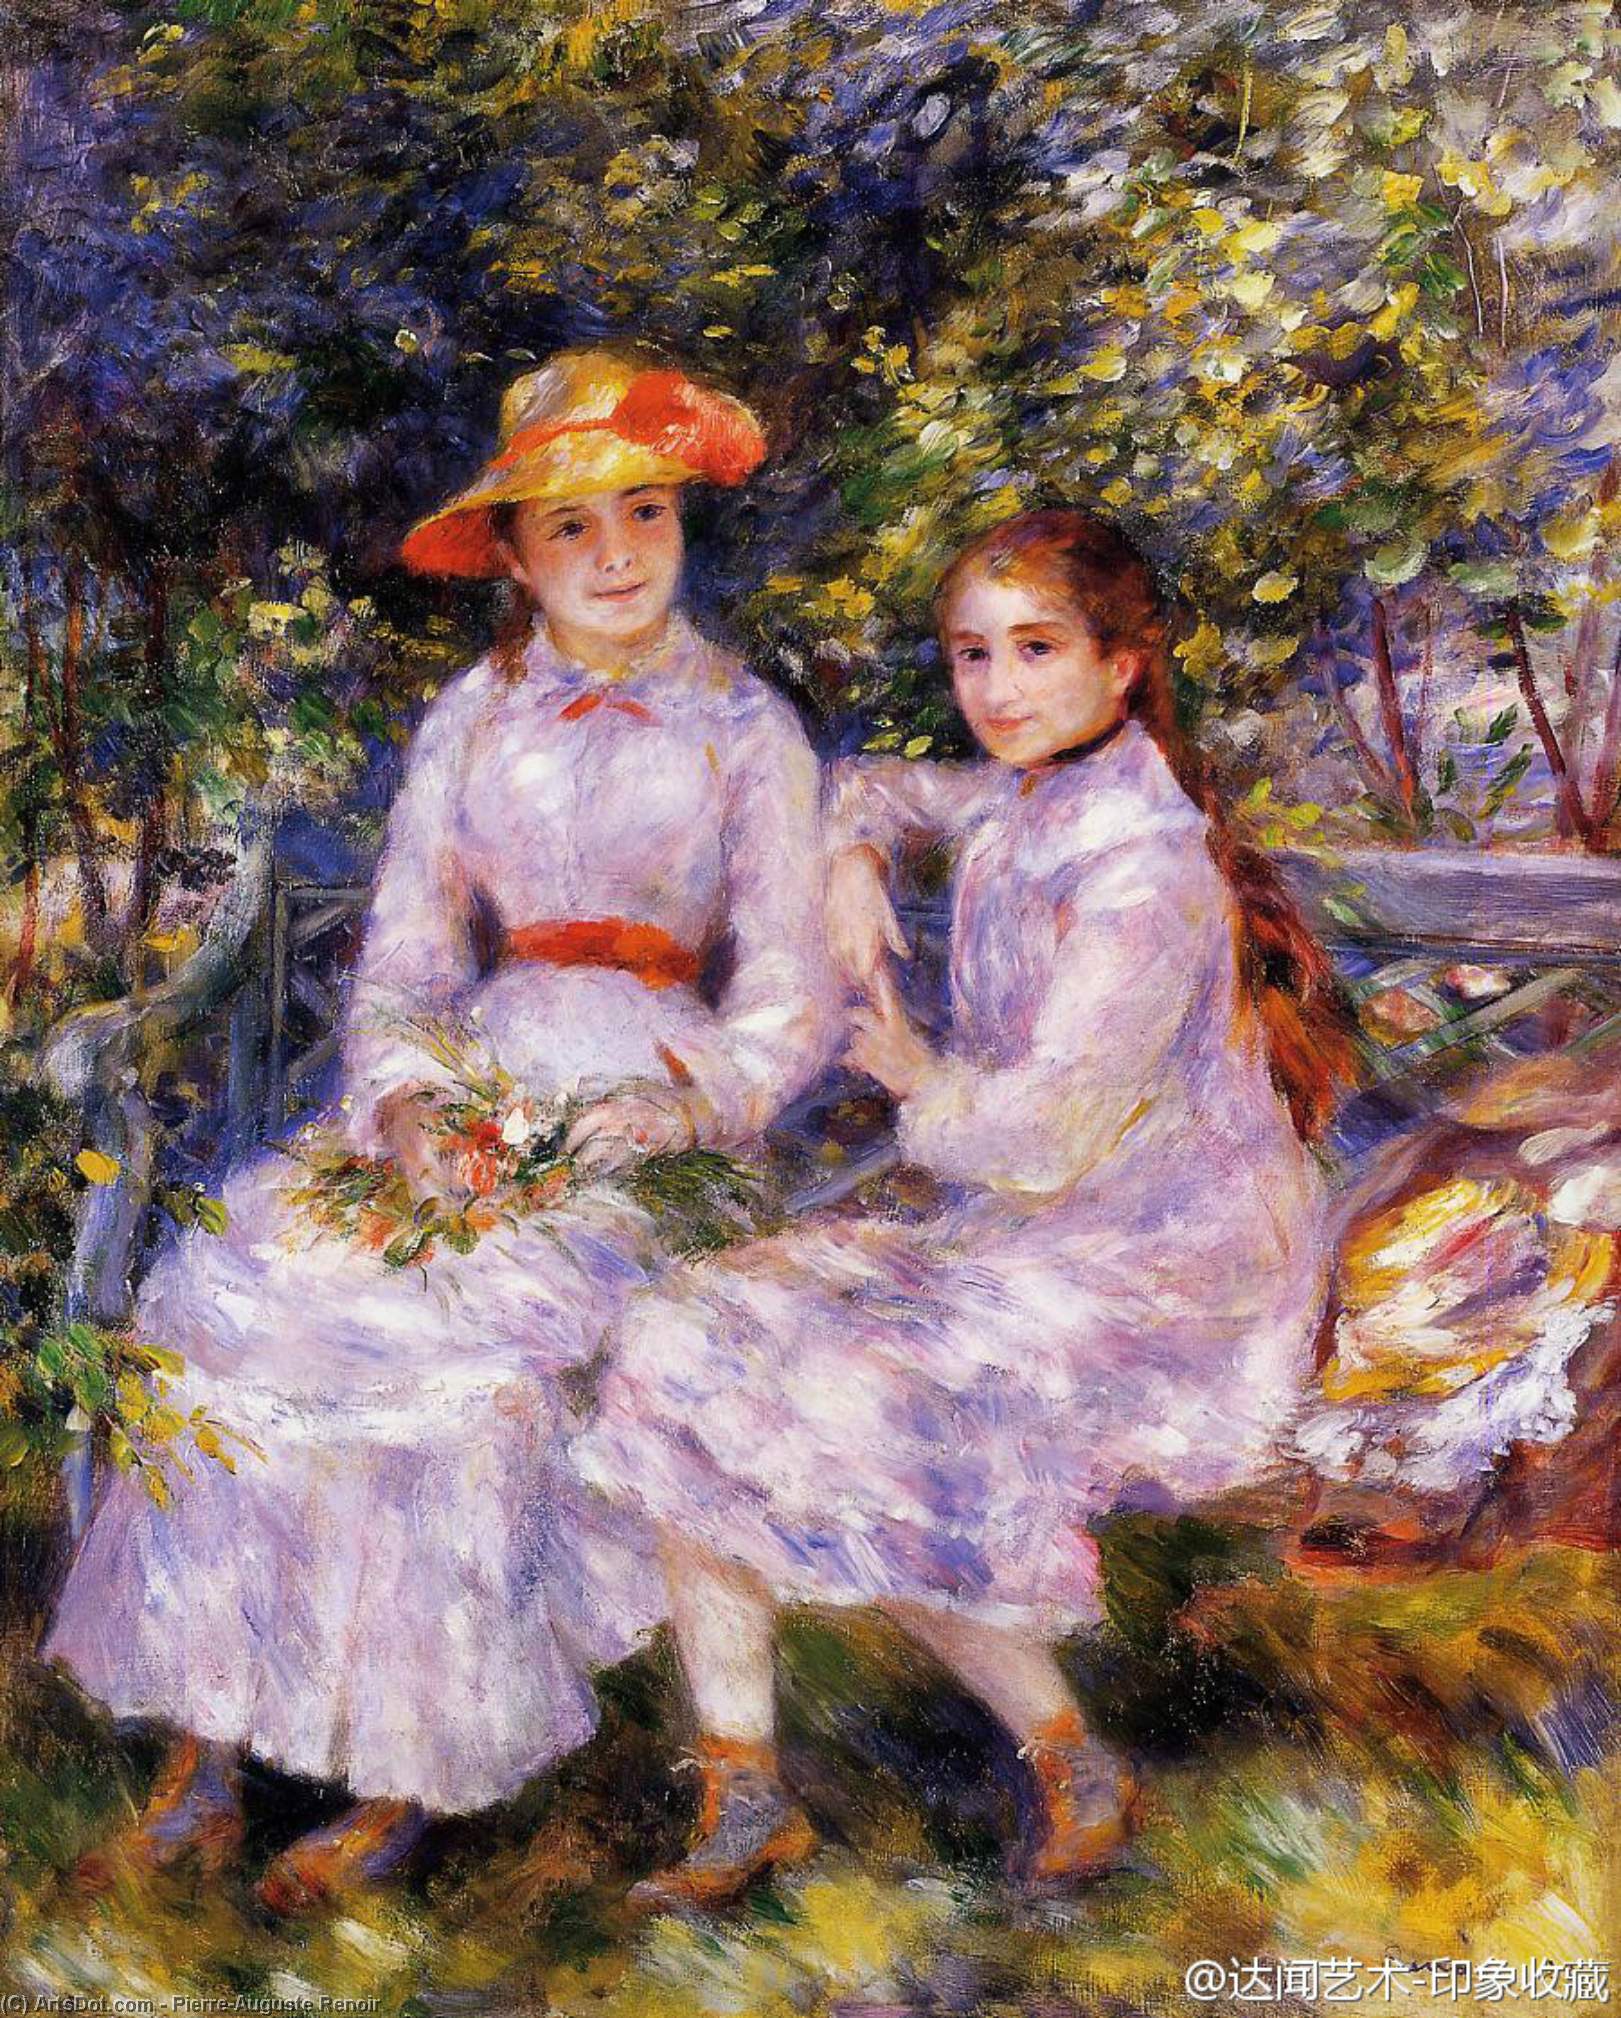 WikiOO.org - Encyclopedia of Fine Arts - Maľba, Artwork Pierre-Auguste Renoir - The Daughters of Paul Durand-Ruel (also known as Marie-Theresa and Jeanne)